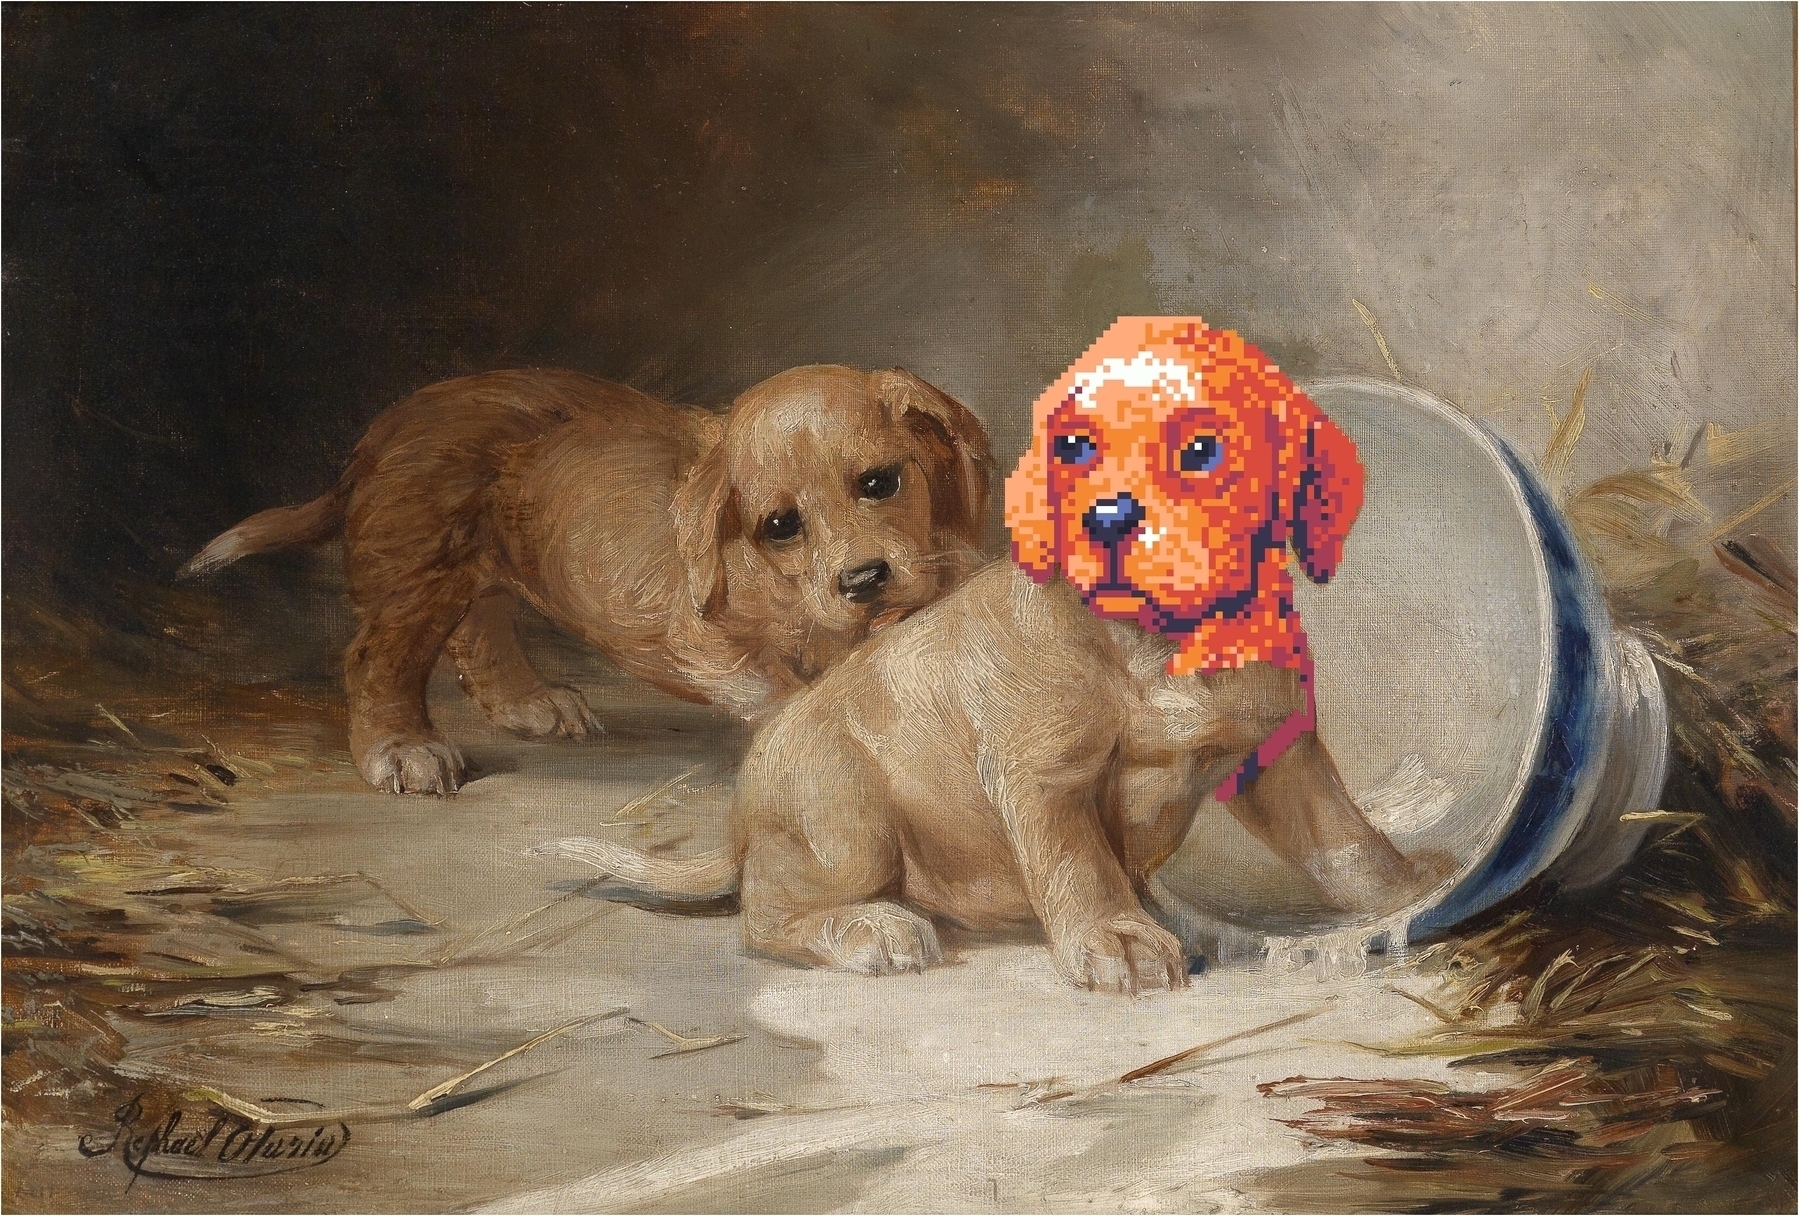 19th century portrait of two mischievous puppies, partially covered by 21th century pixel art